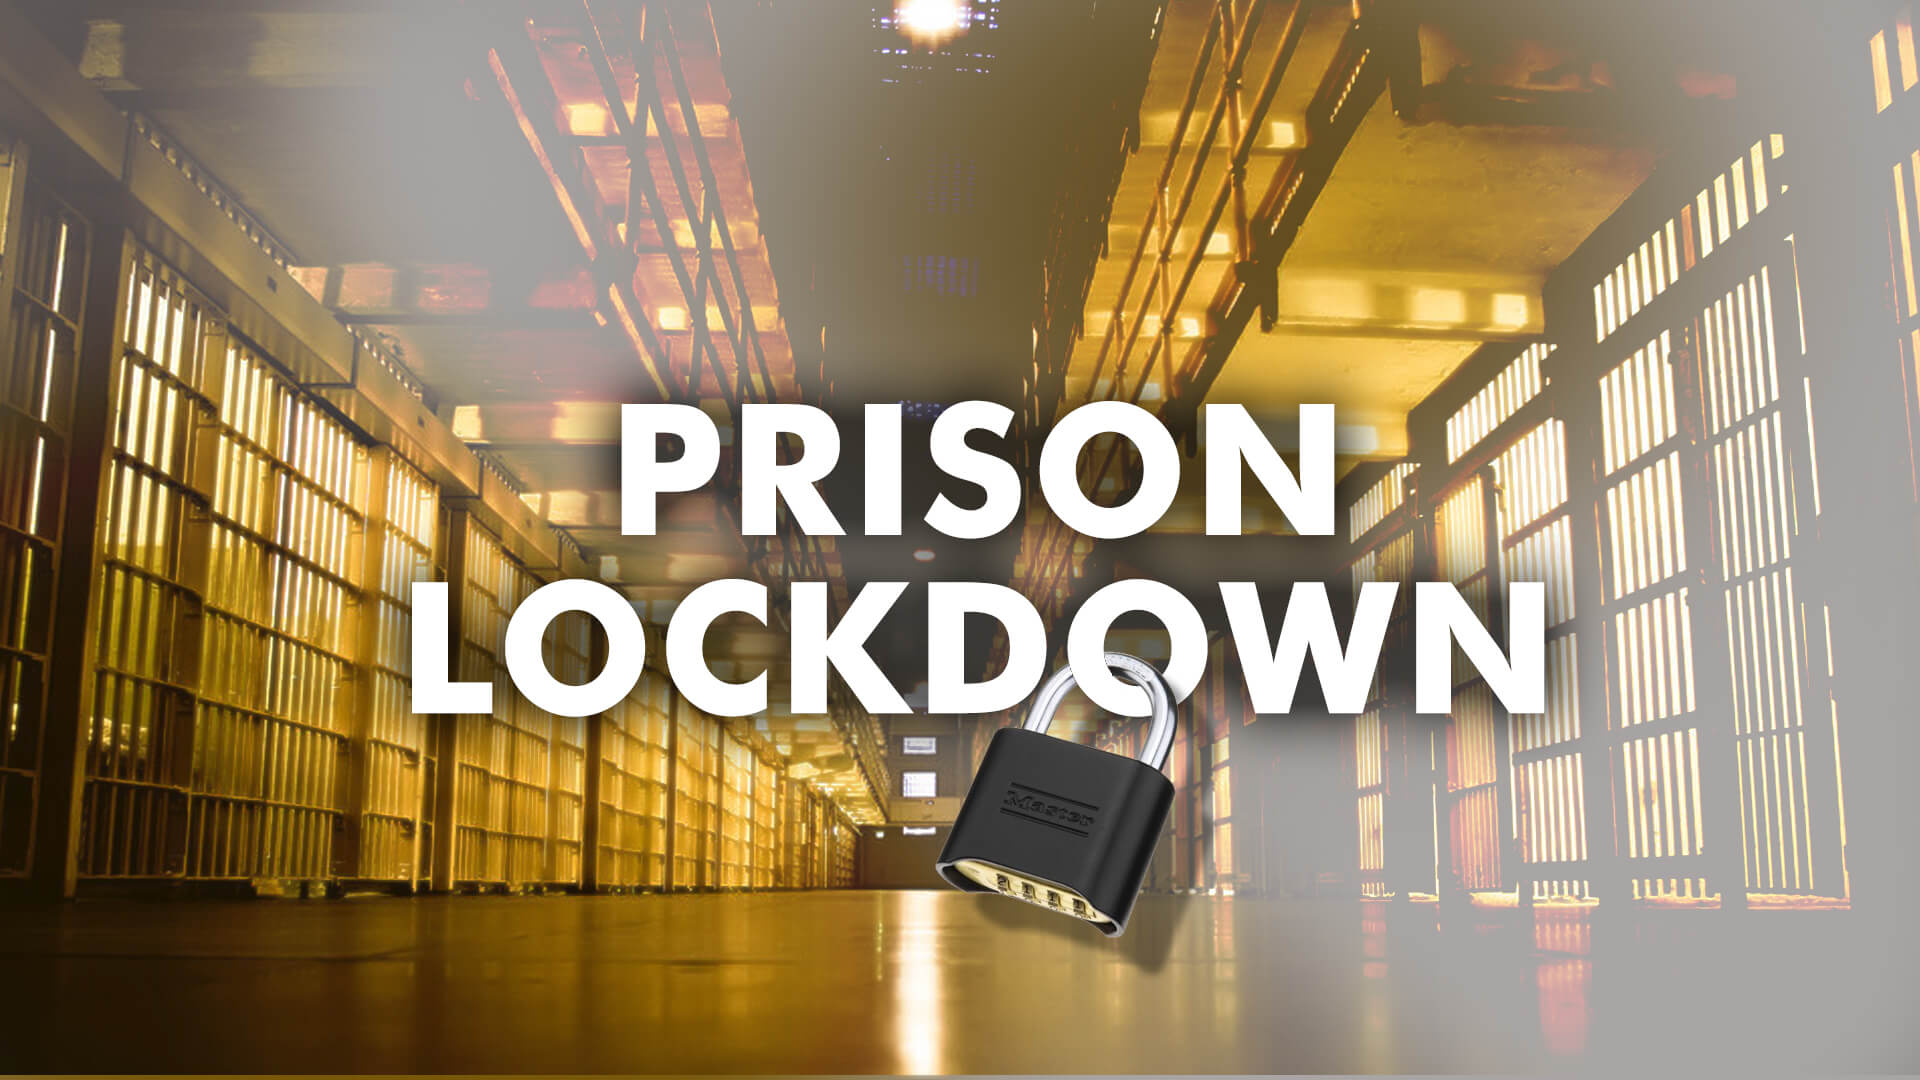 Entire MDOC prison system goes on lockdown following escapes